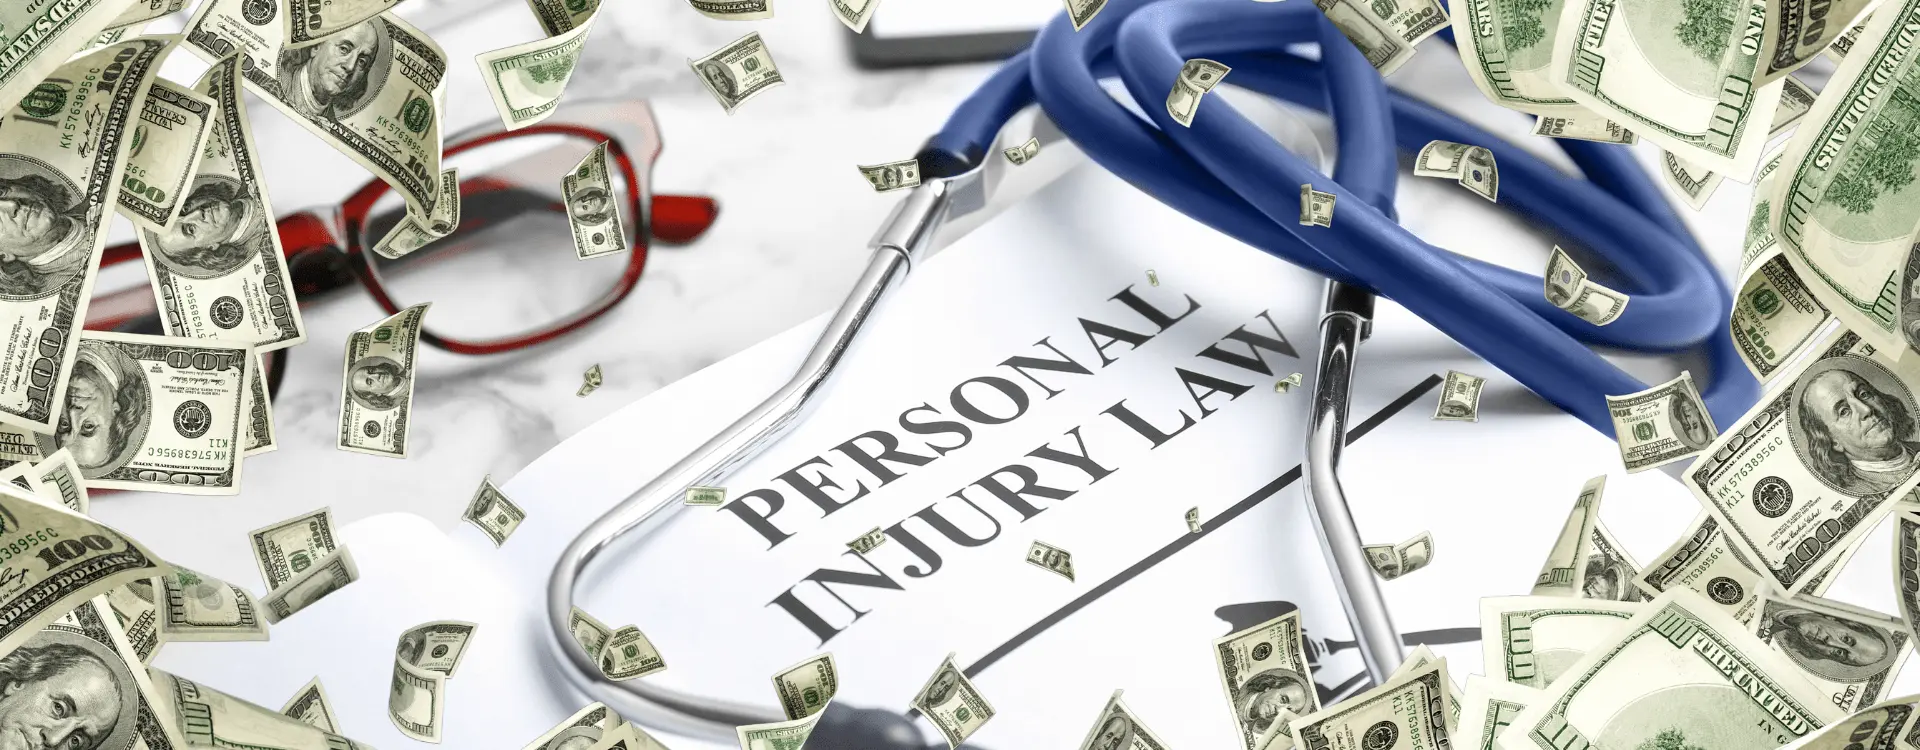 factors that influence personal injury settlement